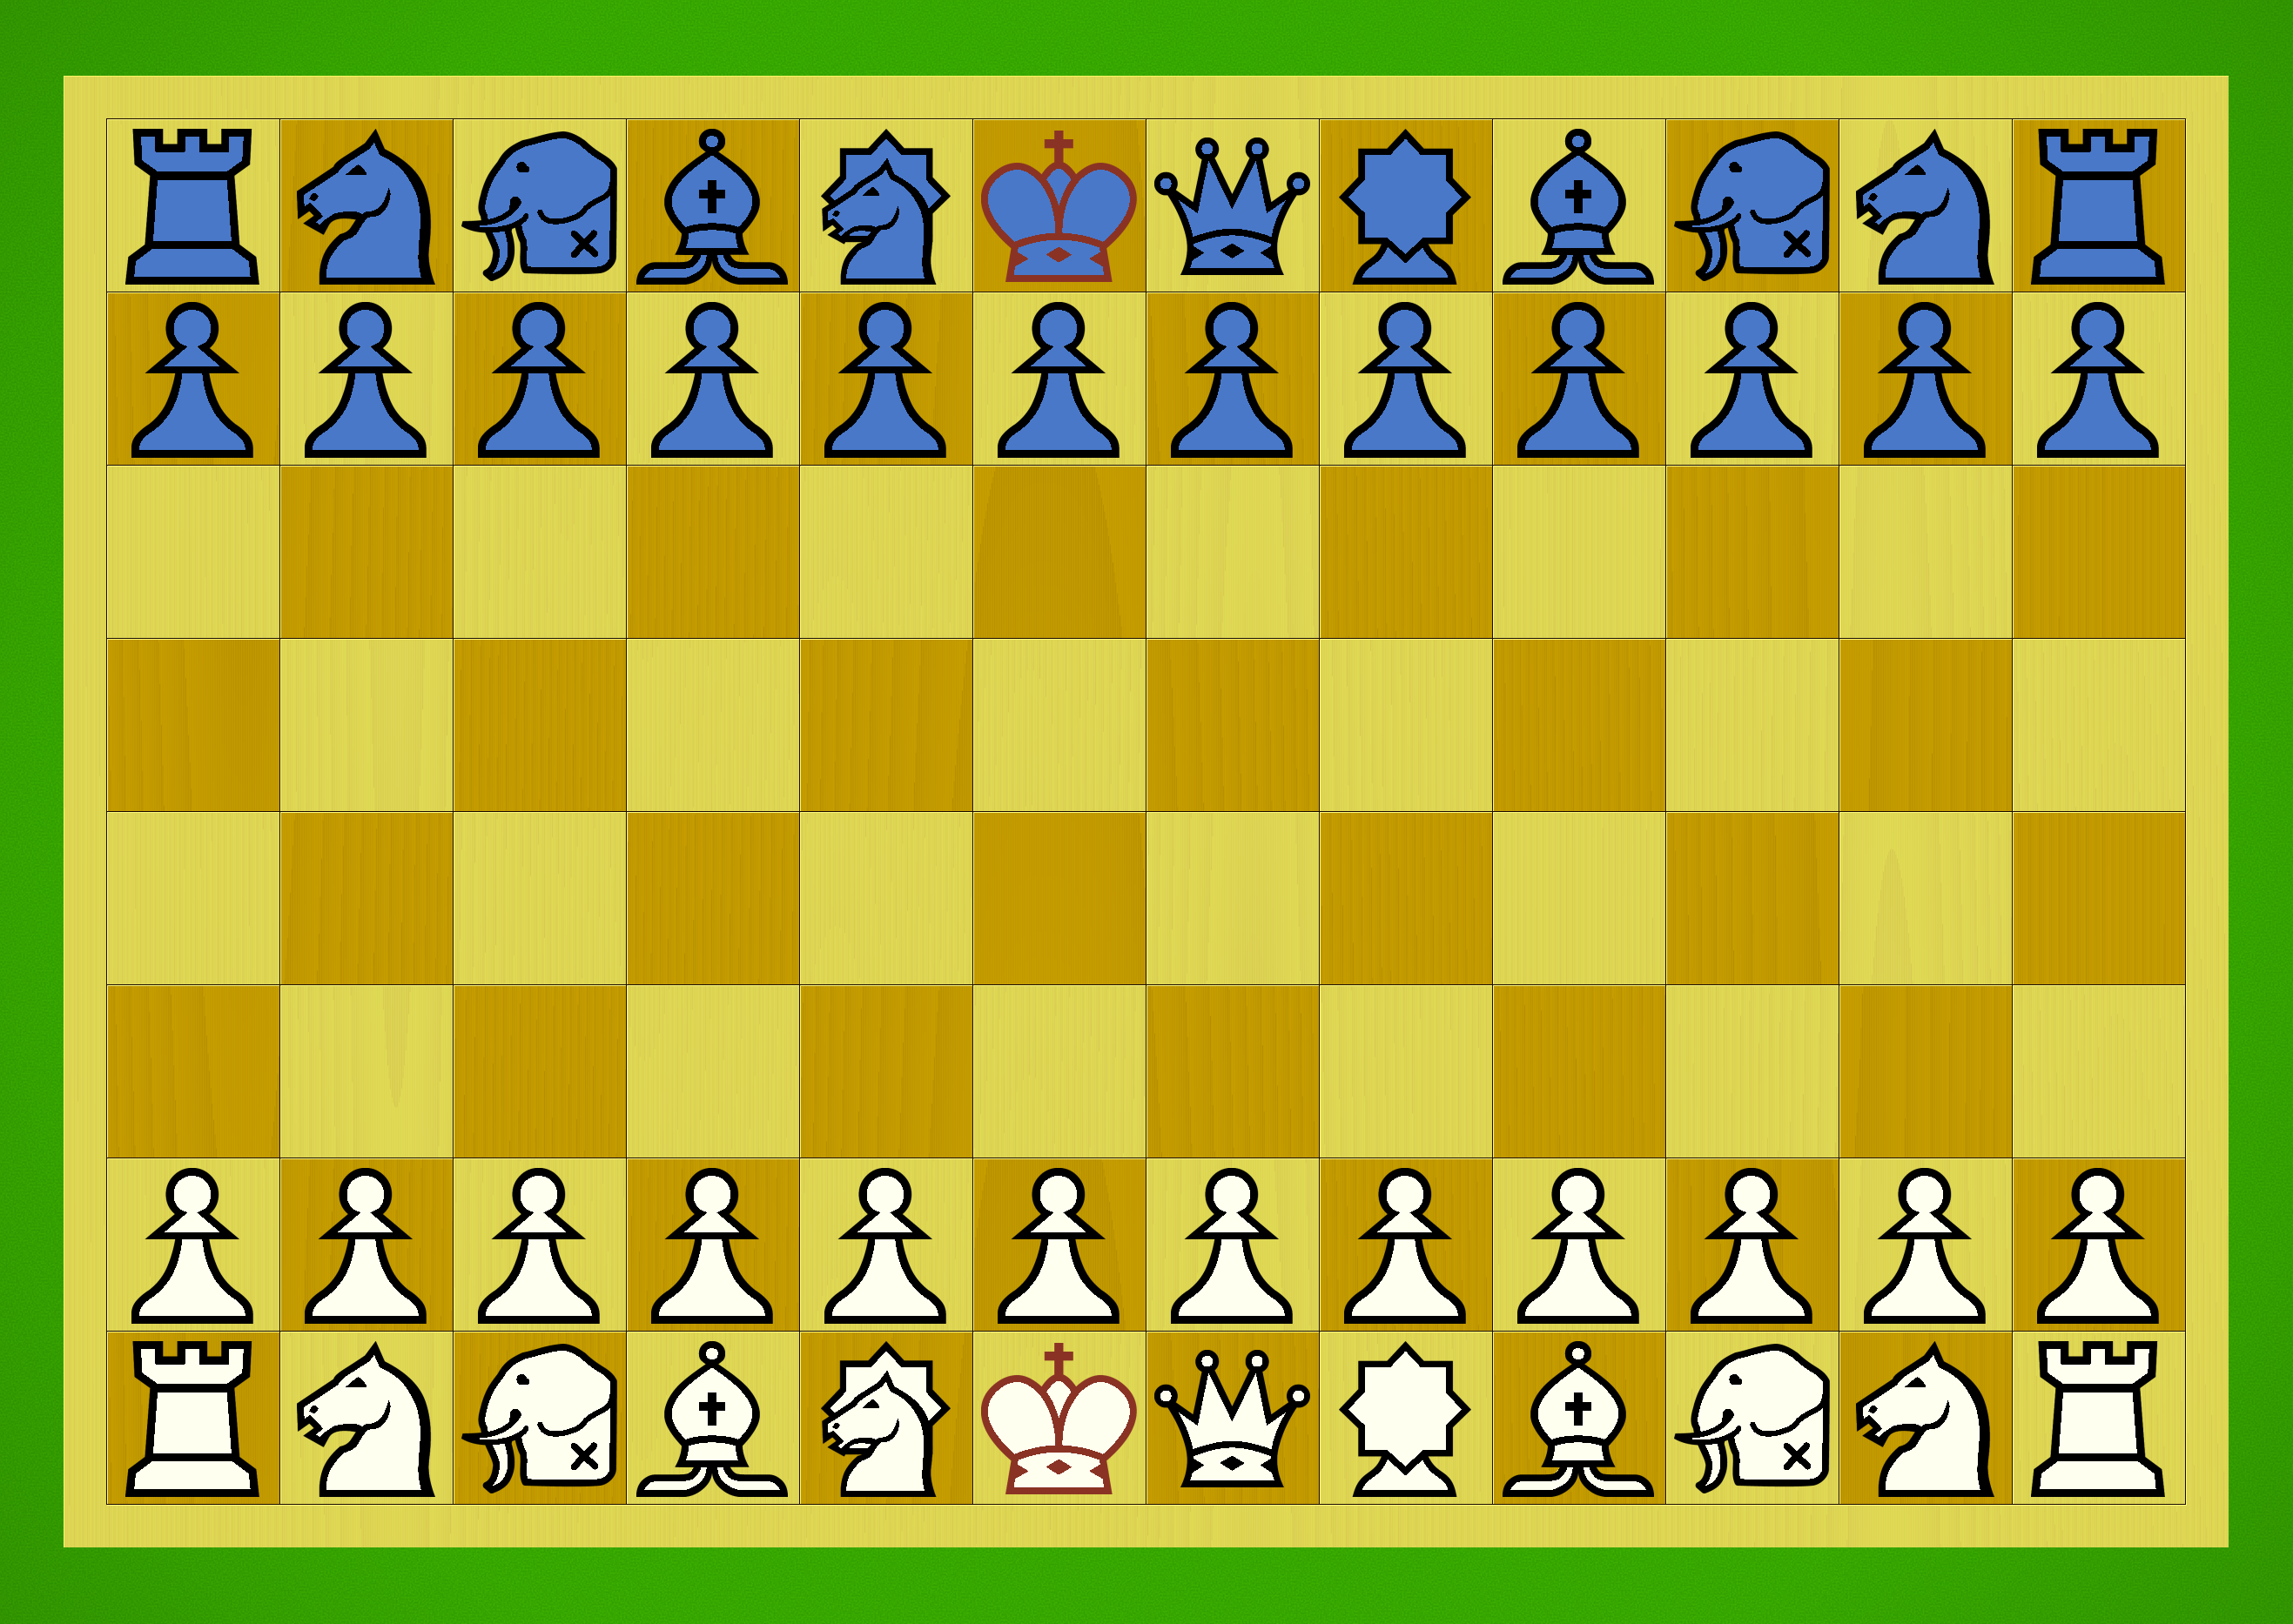 engines - Why does Stockfish evaluate this position as equal? - Chess Stack  Exchange